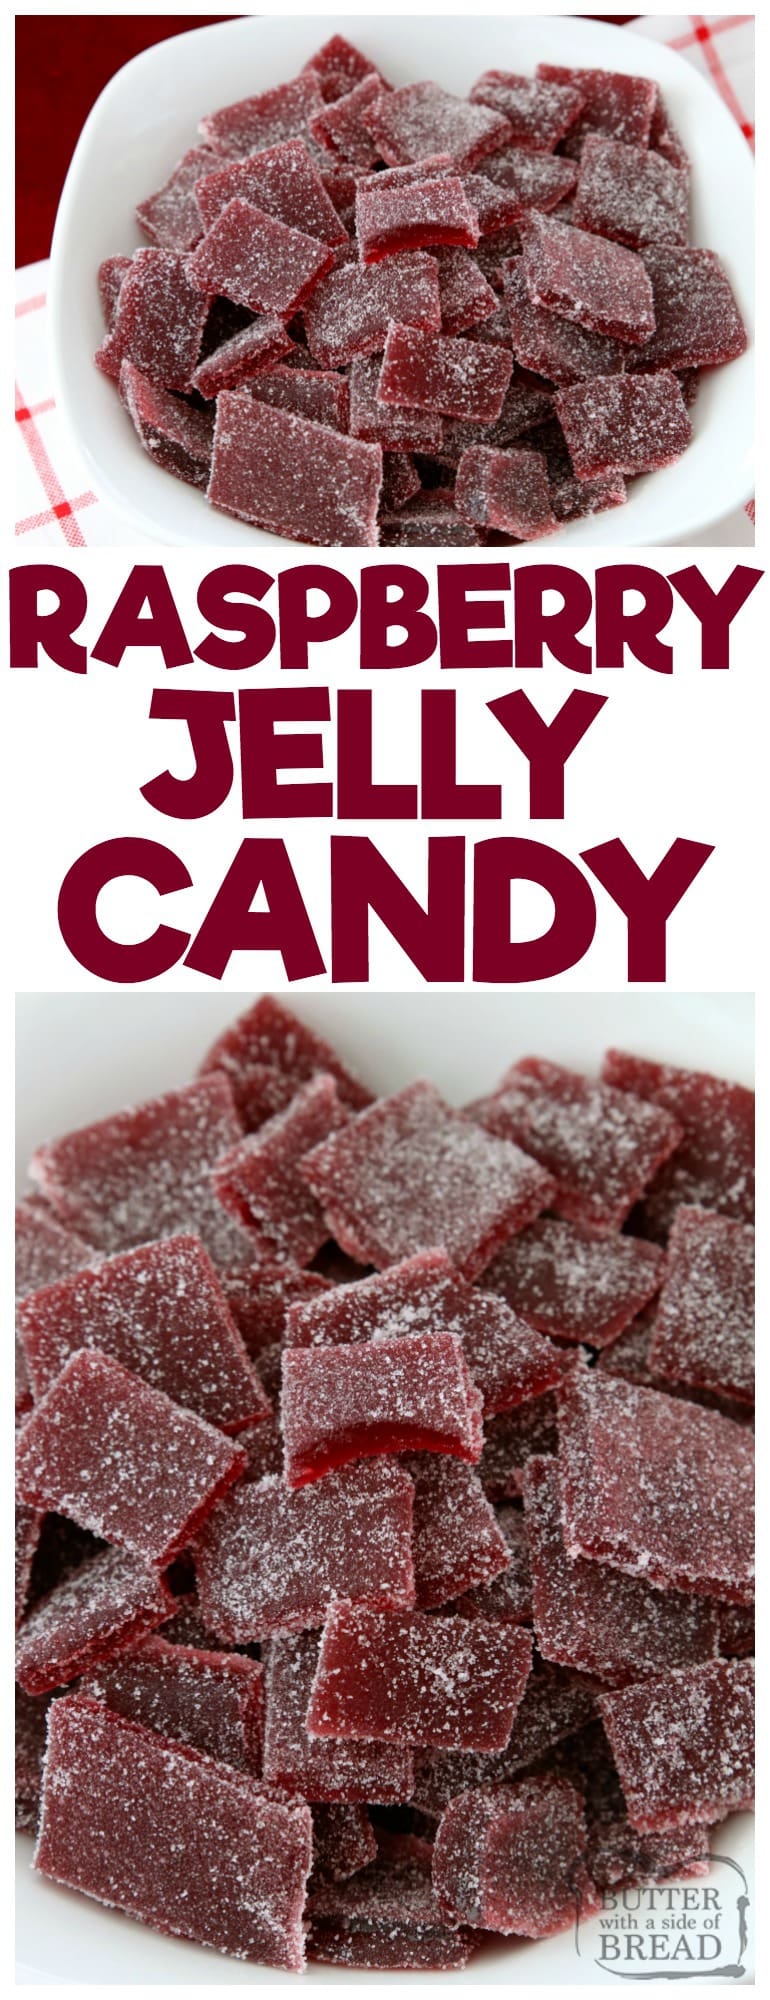 Raspberry Jelly Candy is soft, sweet candy with bright raspberry flavor. Just 5 ingredients & under 10 minutes active time, they're a lovely holiday treat!